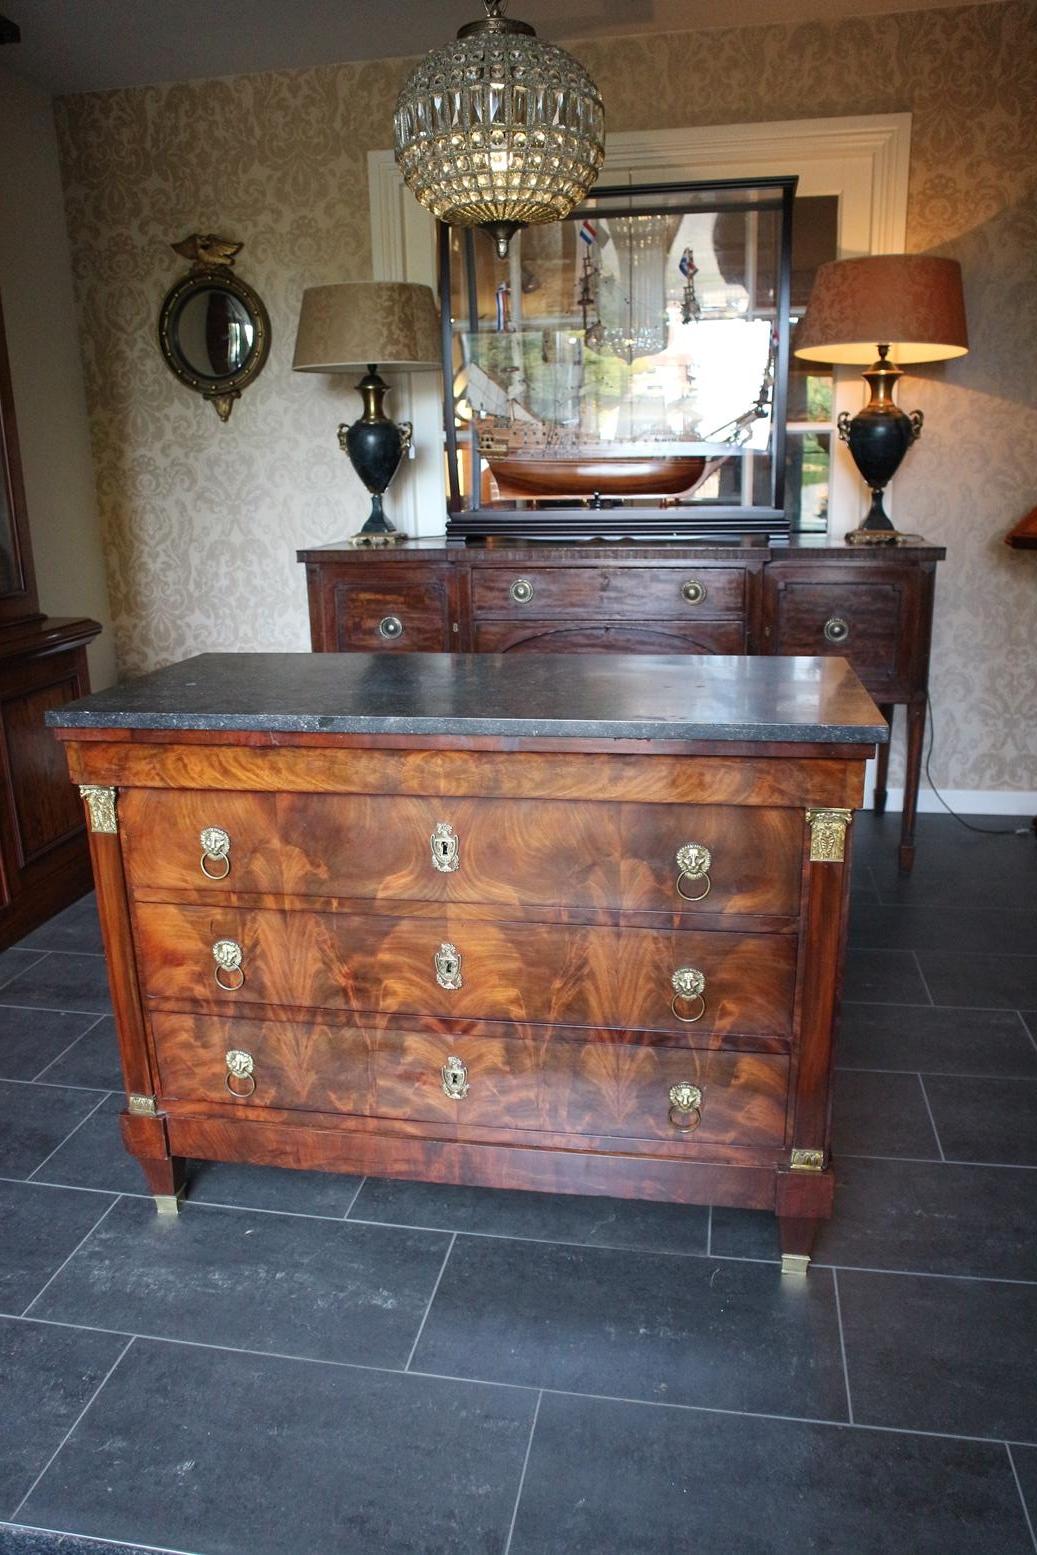 Antique French Empire chest of drawers with natural stone top. Chic chest of drawers with a beautiful warm color. Nicely explained mahogany pattern. Chest of drawers is in good and original condition. One side has some old tears.

Origin: